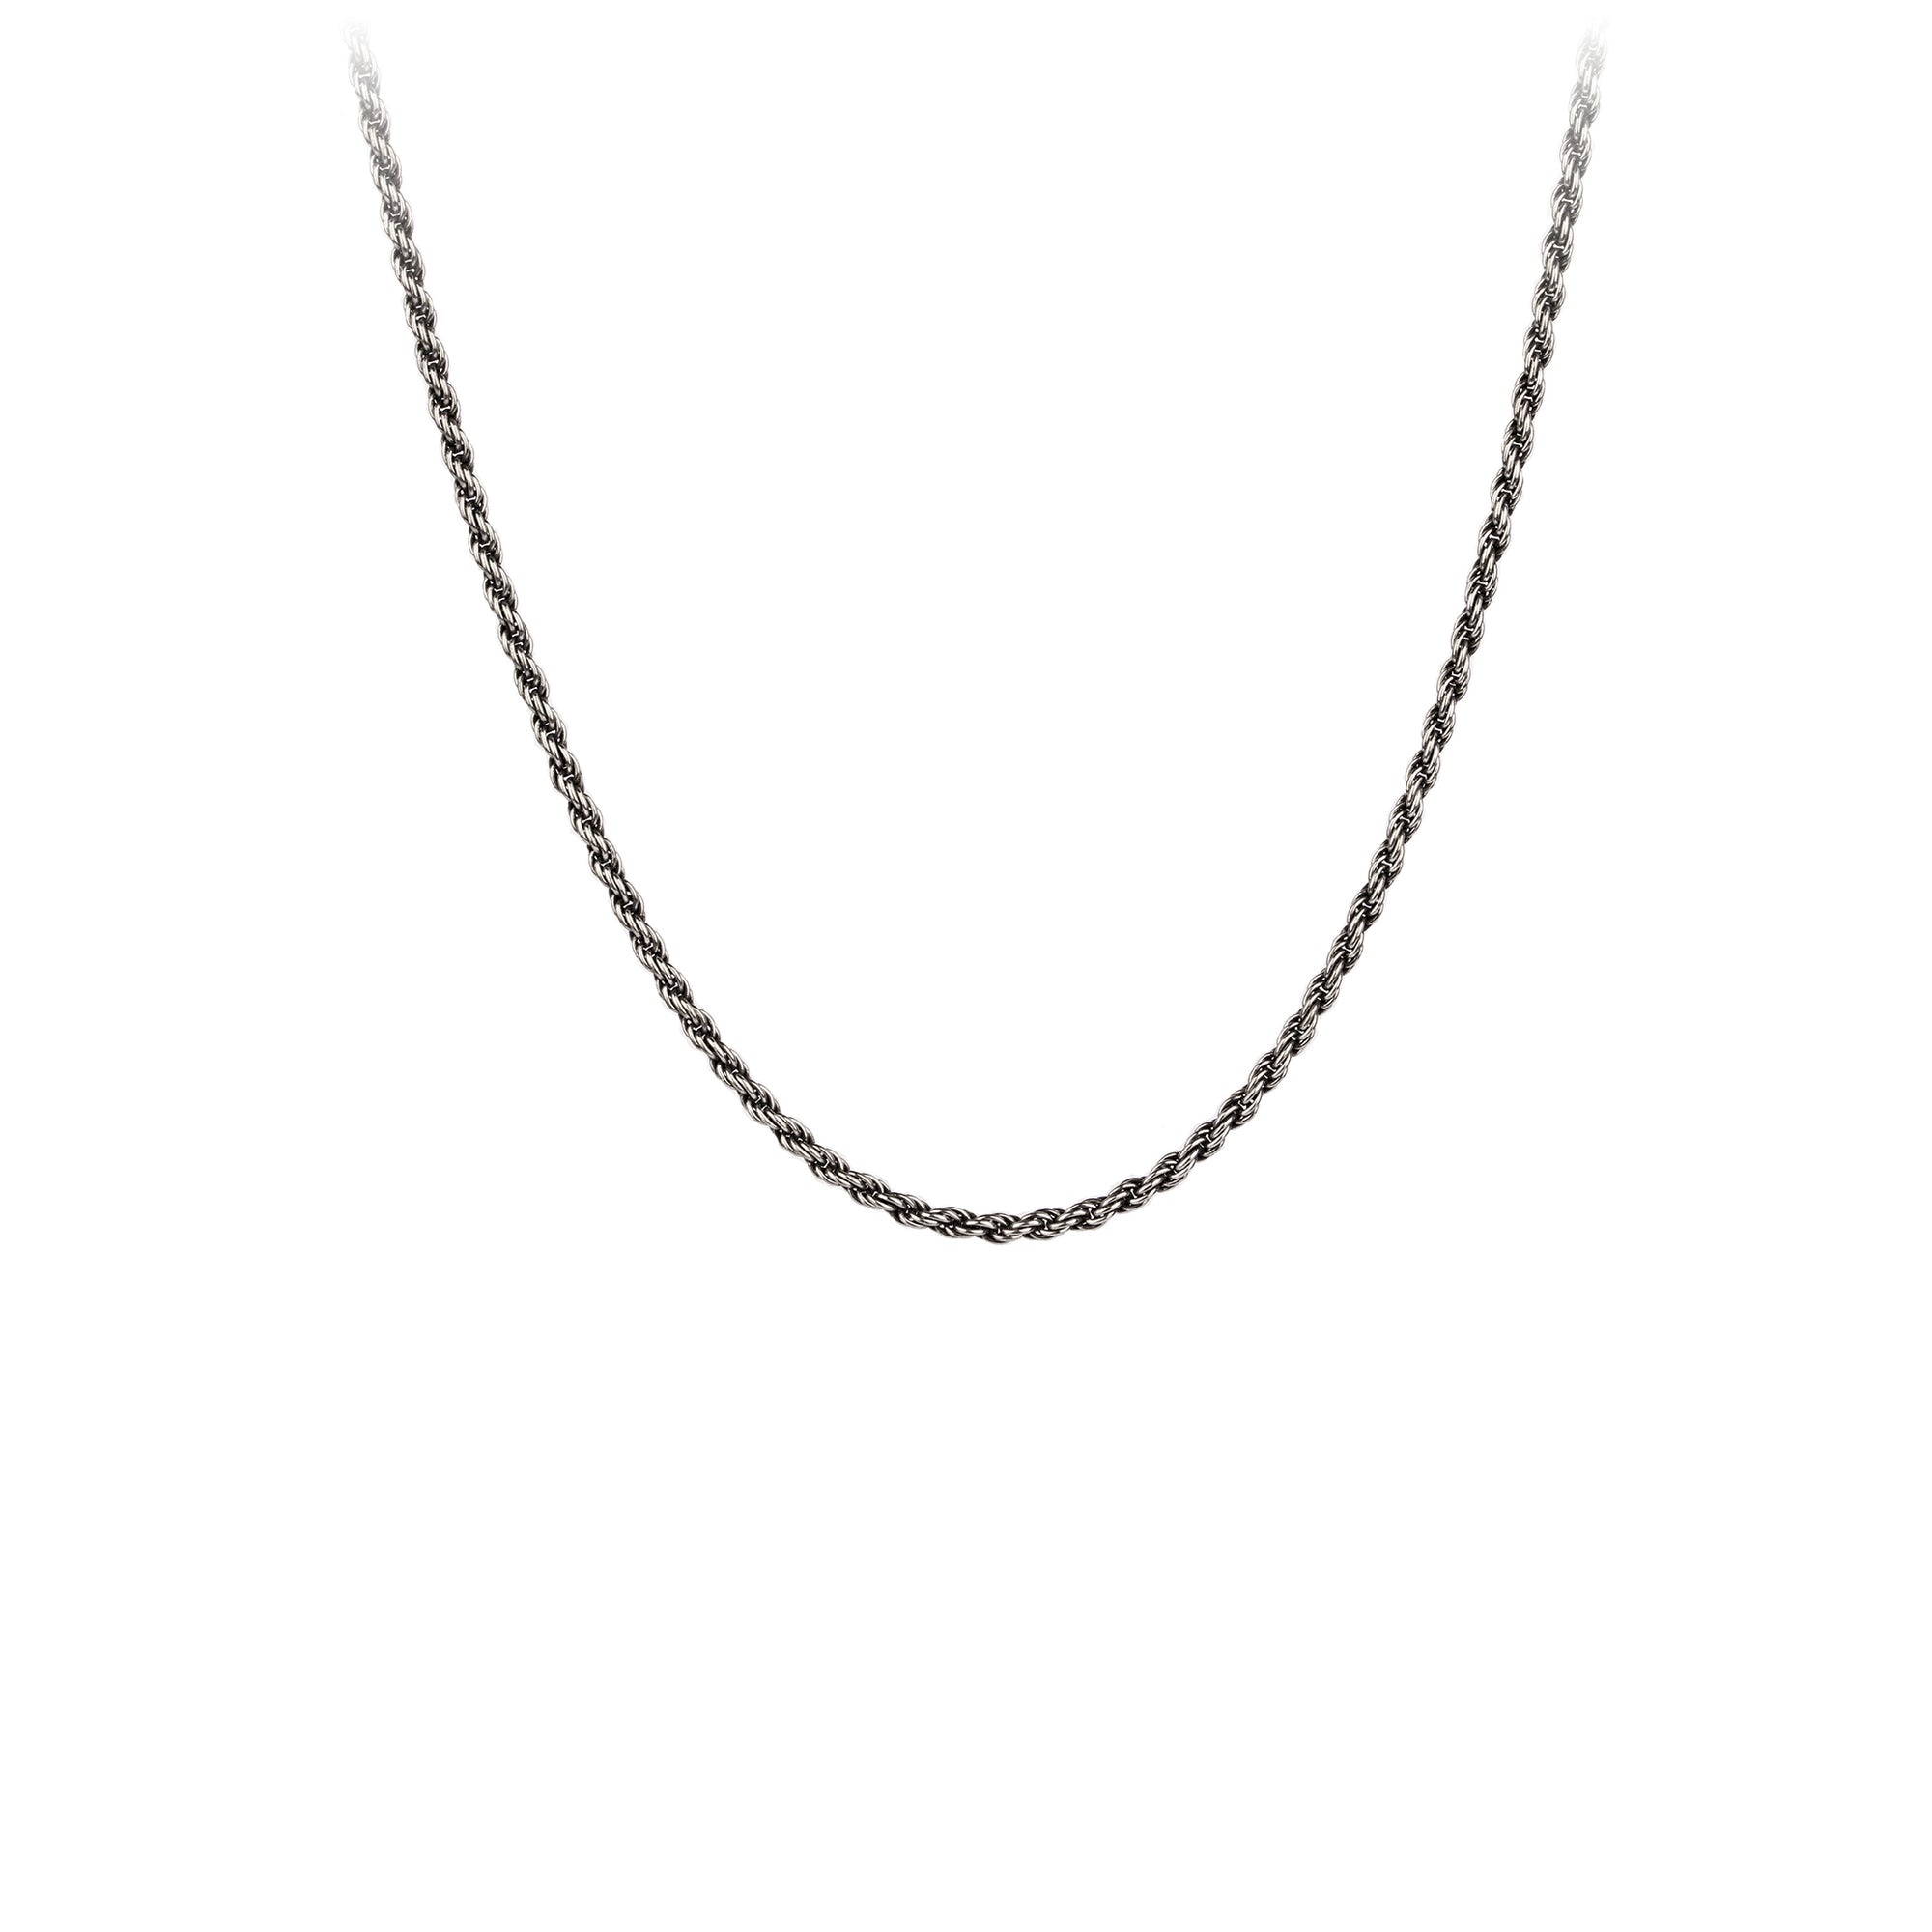 A sterling silver chain with heavy rope links